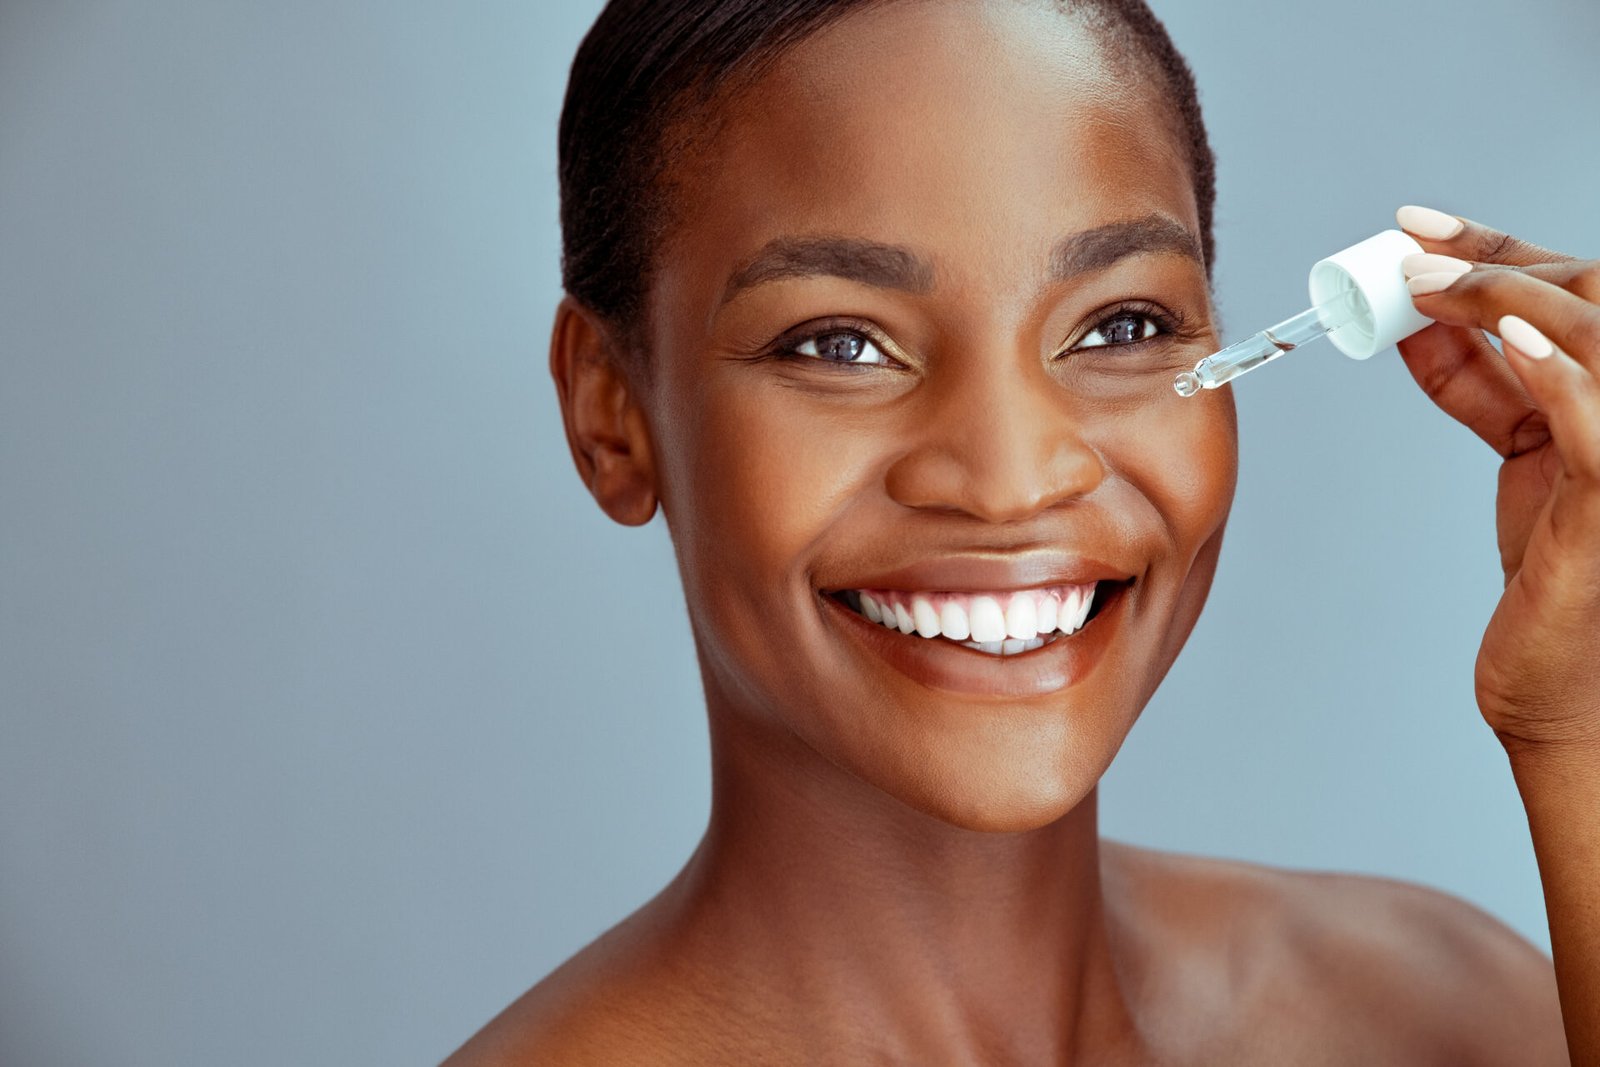 Portrait of african american woman applying liquid cosmetic oil for facial treatment against blue background with copy space. Beauty black middle aged woman with natural makeup holding glass dropper. Close up face of mature lady applying serum around dark circle eyes to combat wrinkles.